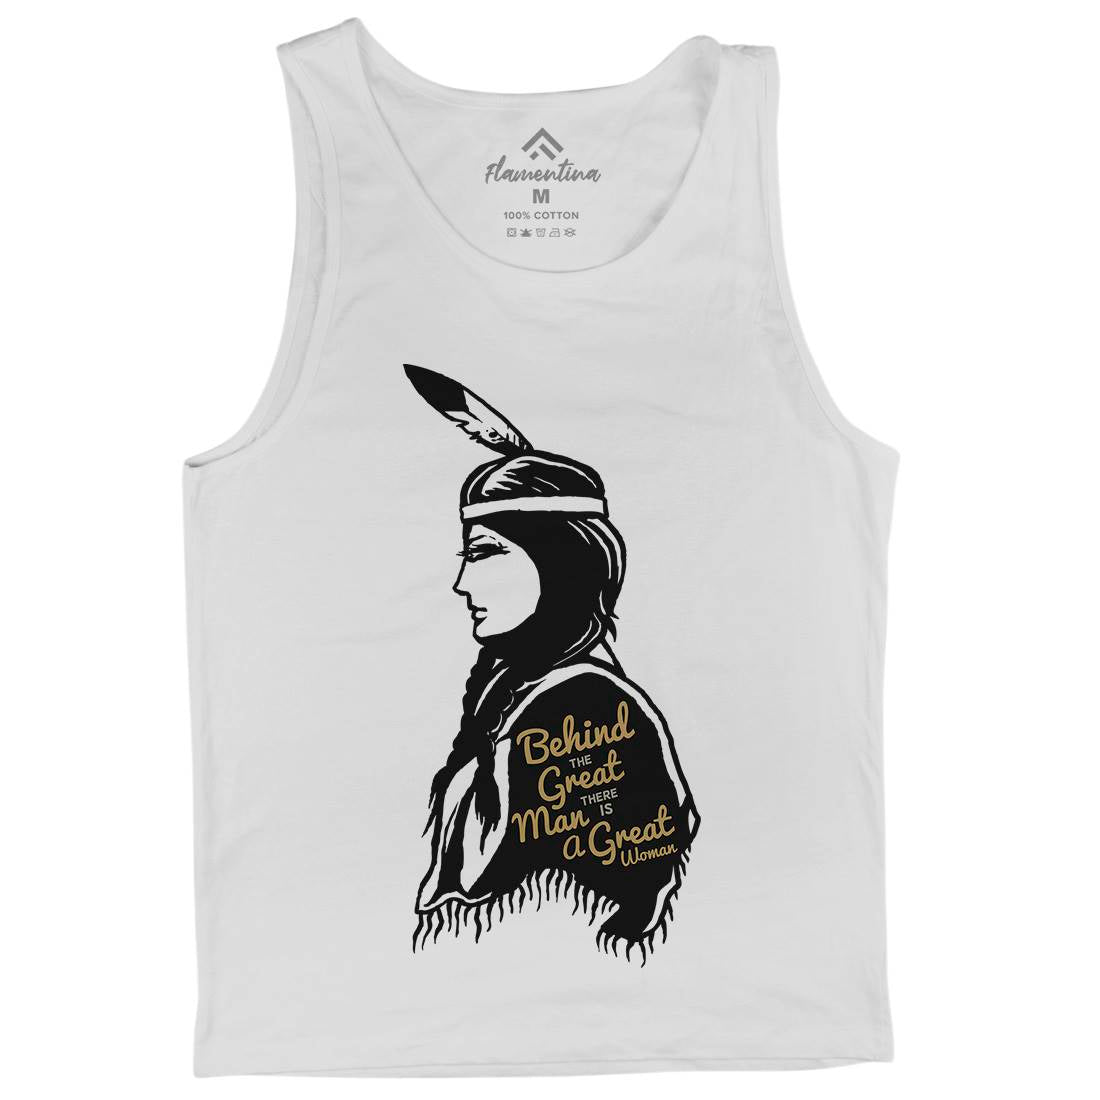 Great Woman Mens Tank Top Vest Quotes A324